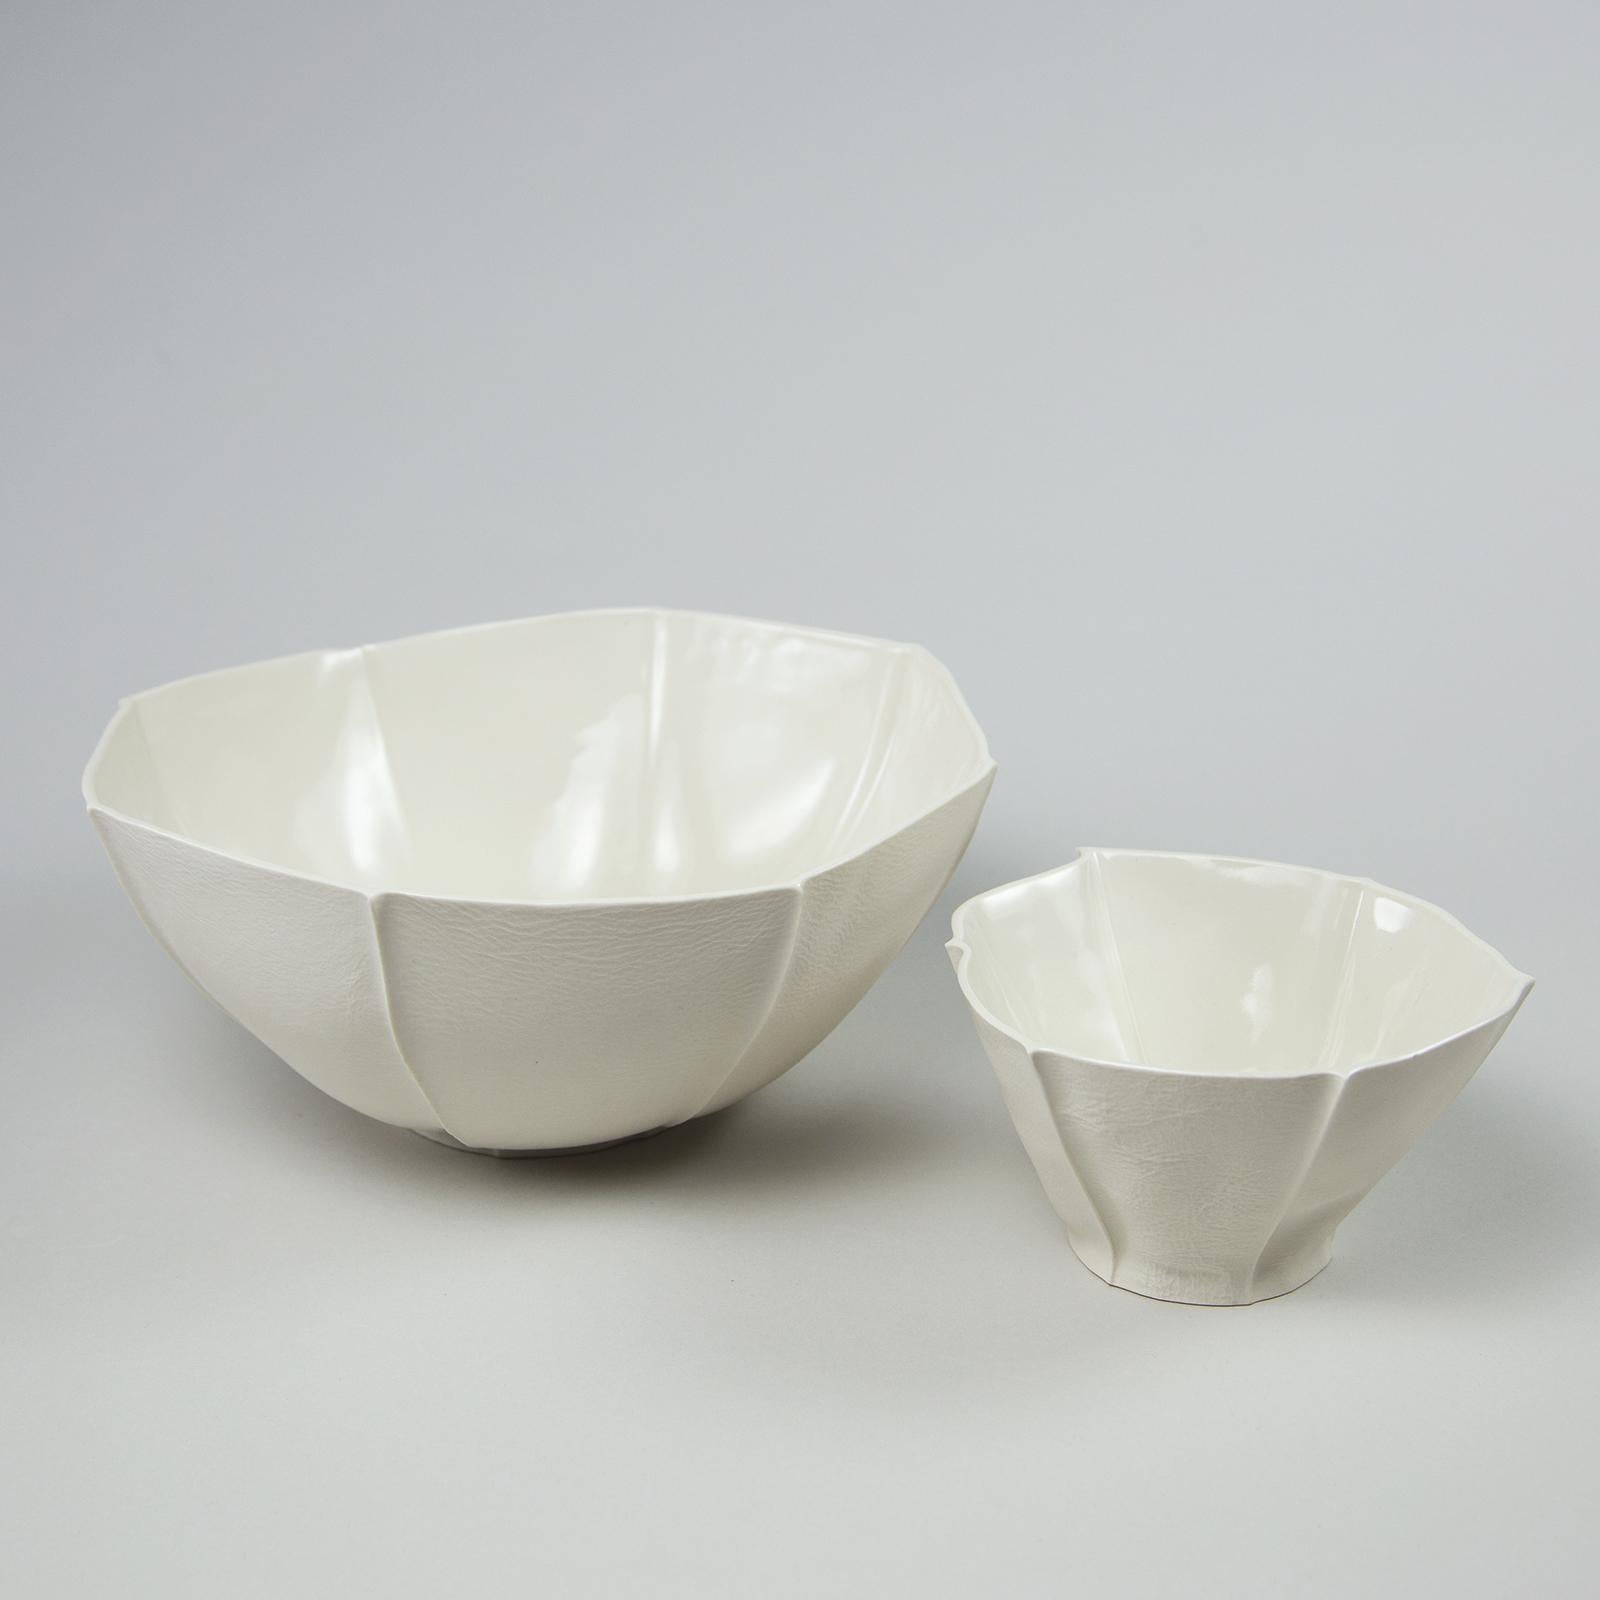 A pair of tactile and organic shaped porcelain bowls with leather textured exterior surface and a smooth glazed interior. The Kawa Bowls are expressive and lively. With their fluid forms and pronounced leather texture, they demonstrate the unique